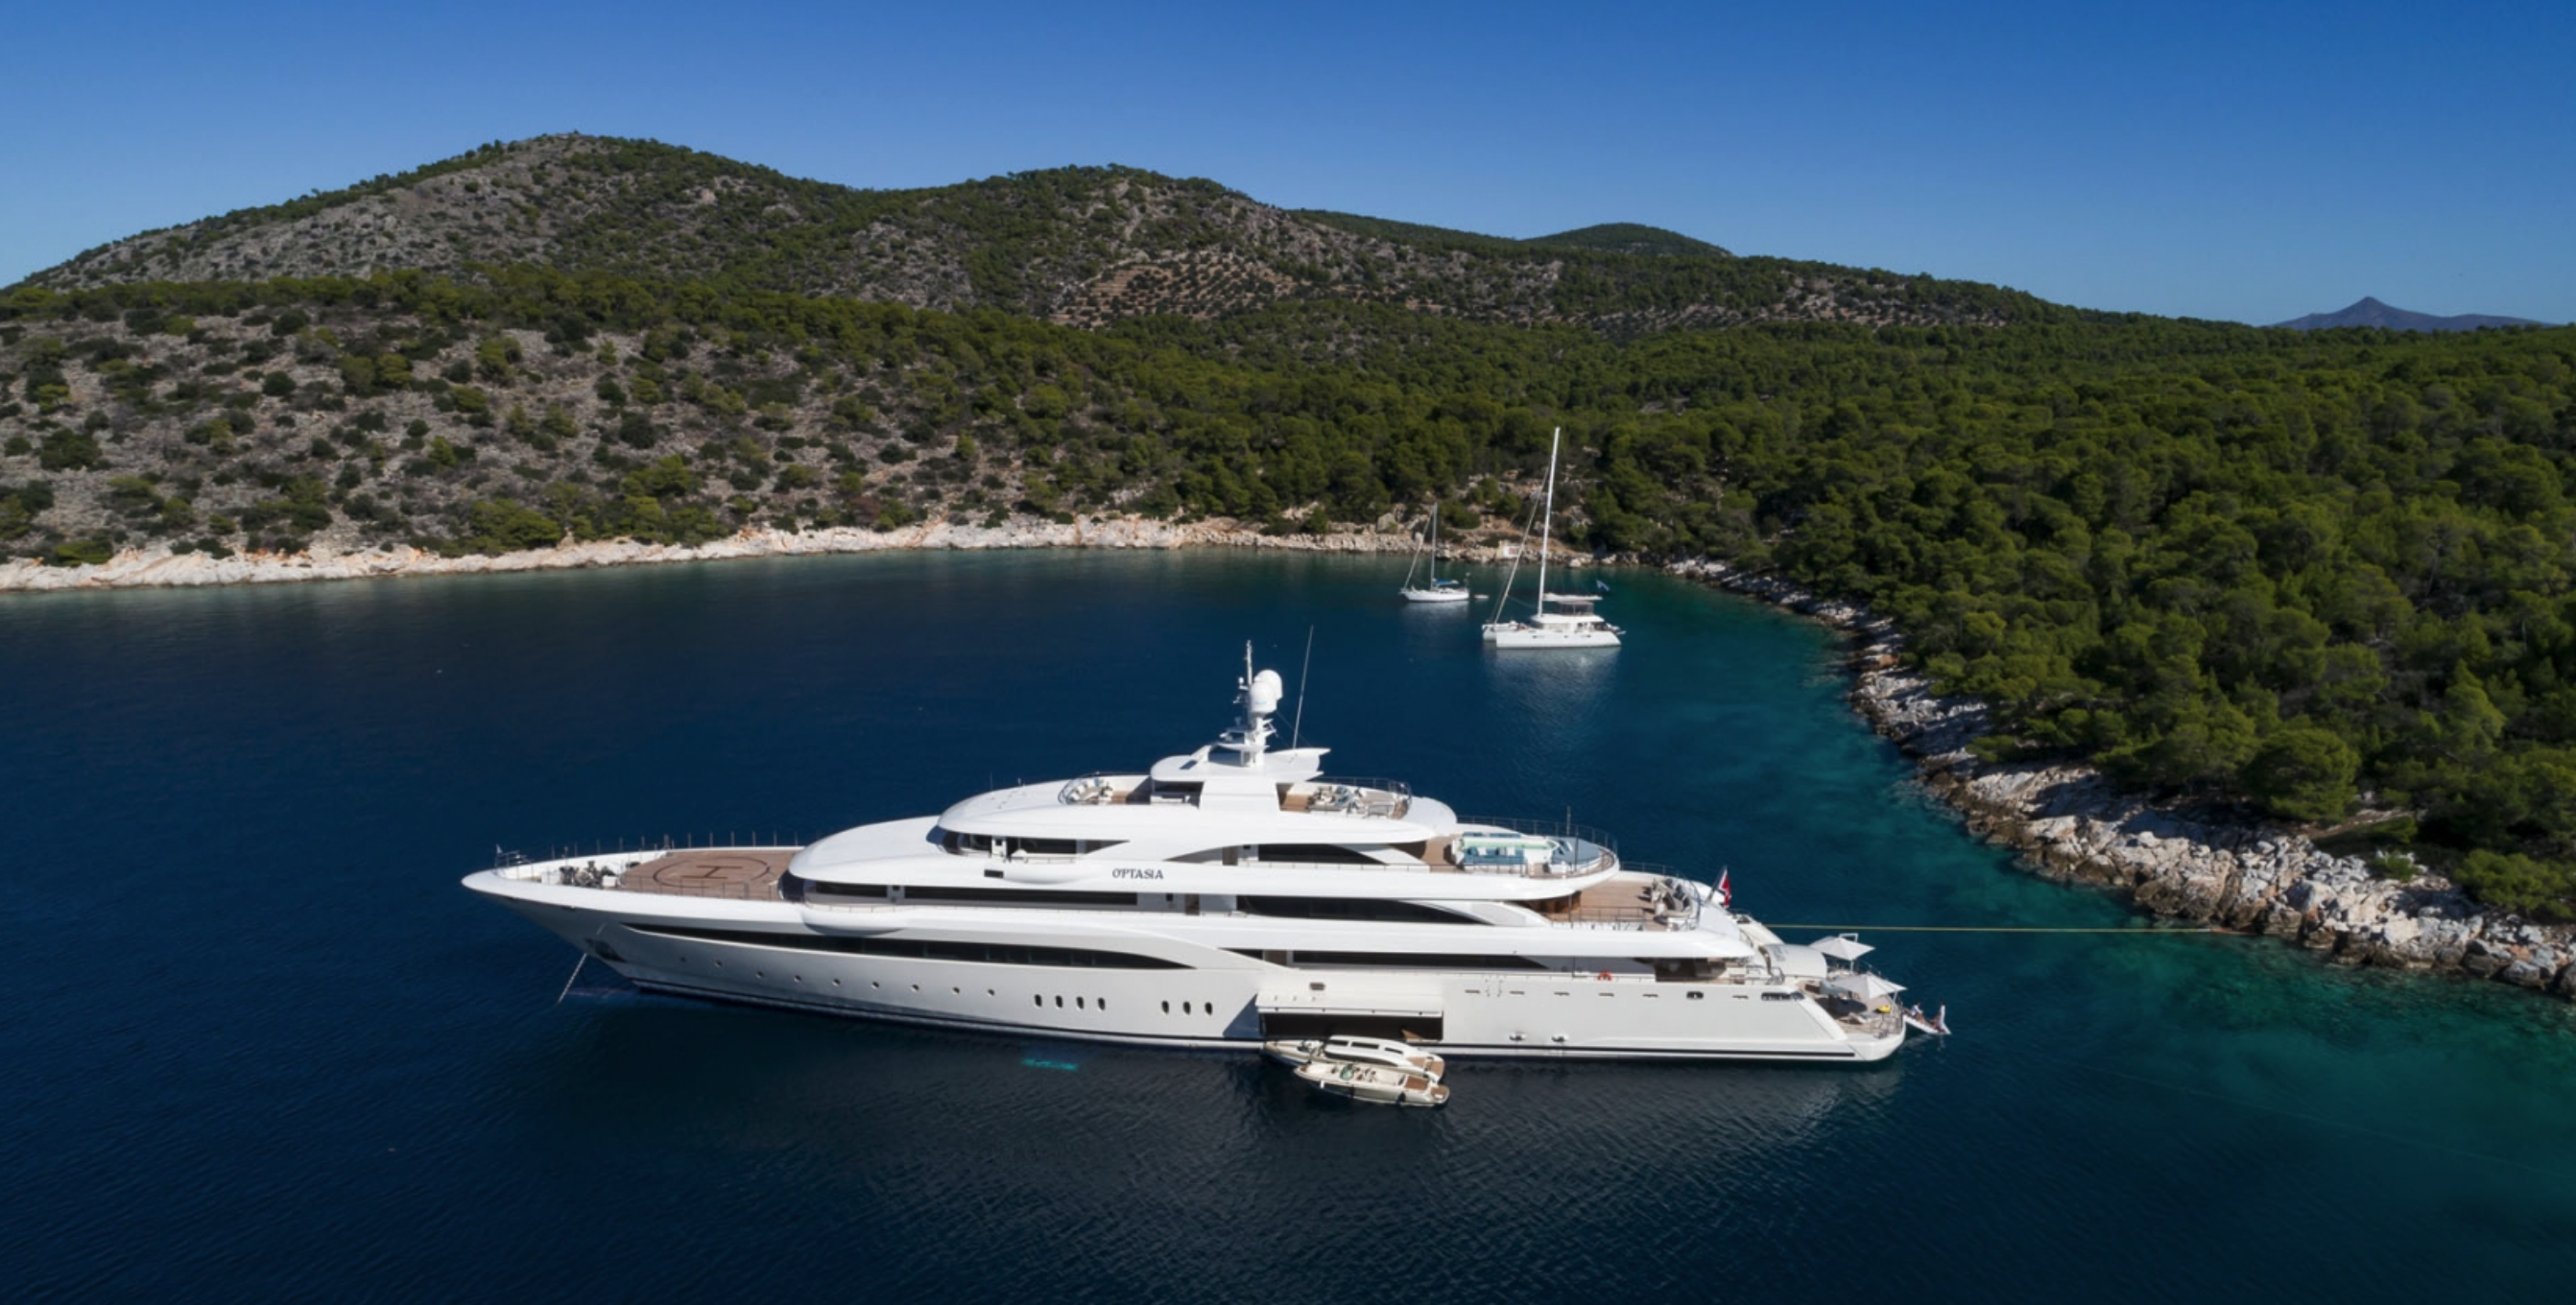 O’Ptasia - Yacht Charter Turkey & Boat hire in East Mediterranean 1